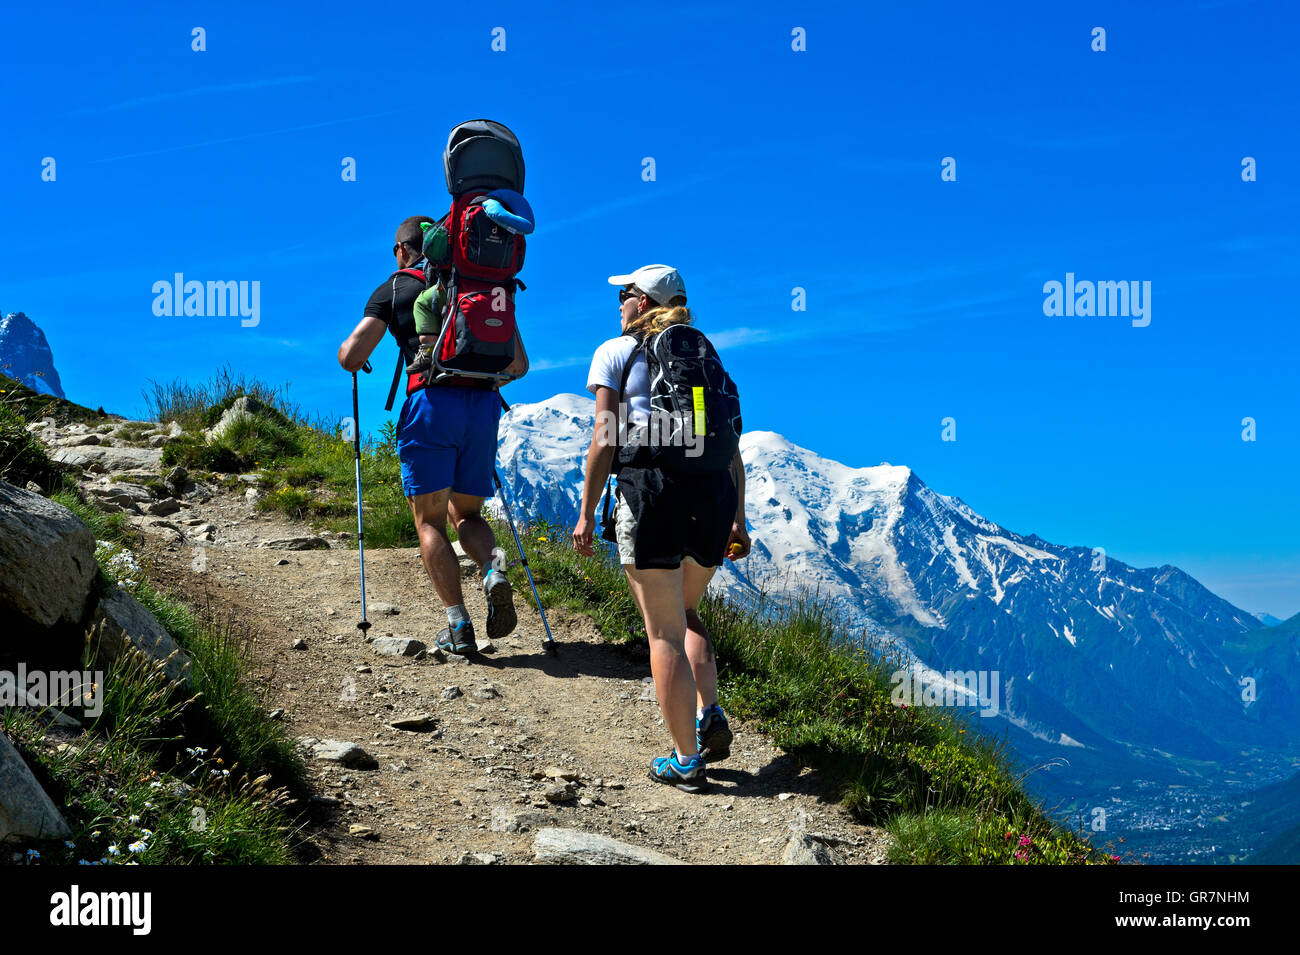 Couple With Toddler In A Child Carrier Backpack On A Hiking Tour, Mont Blanc Massif Behind, Chamonix, France Stock Photo